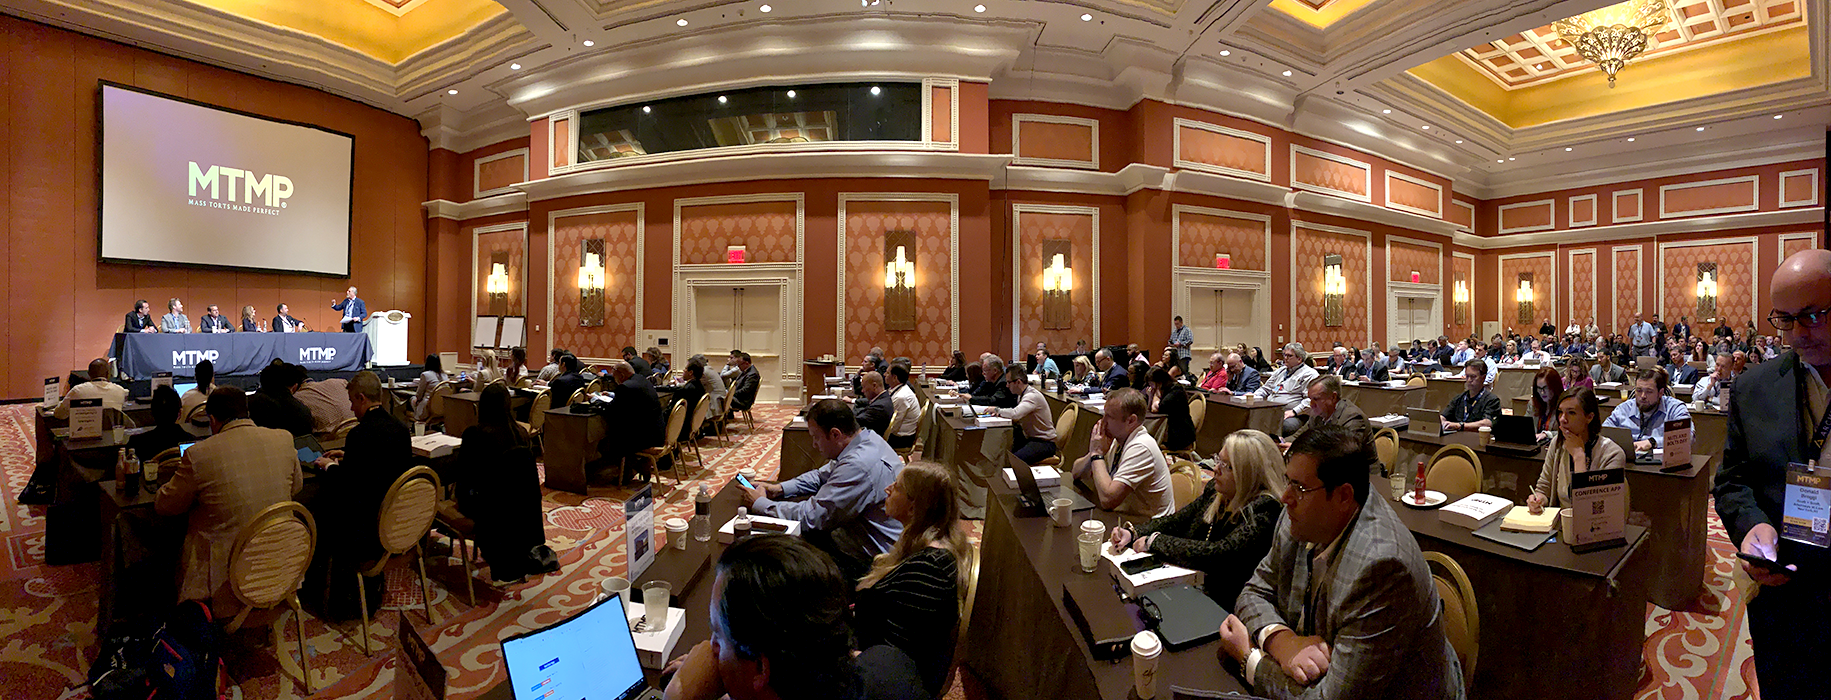 Panoramic view of a large crowd attorneys sitting in banquet room